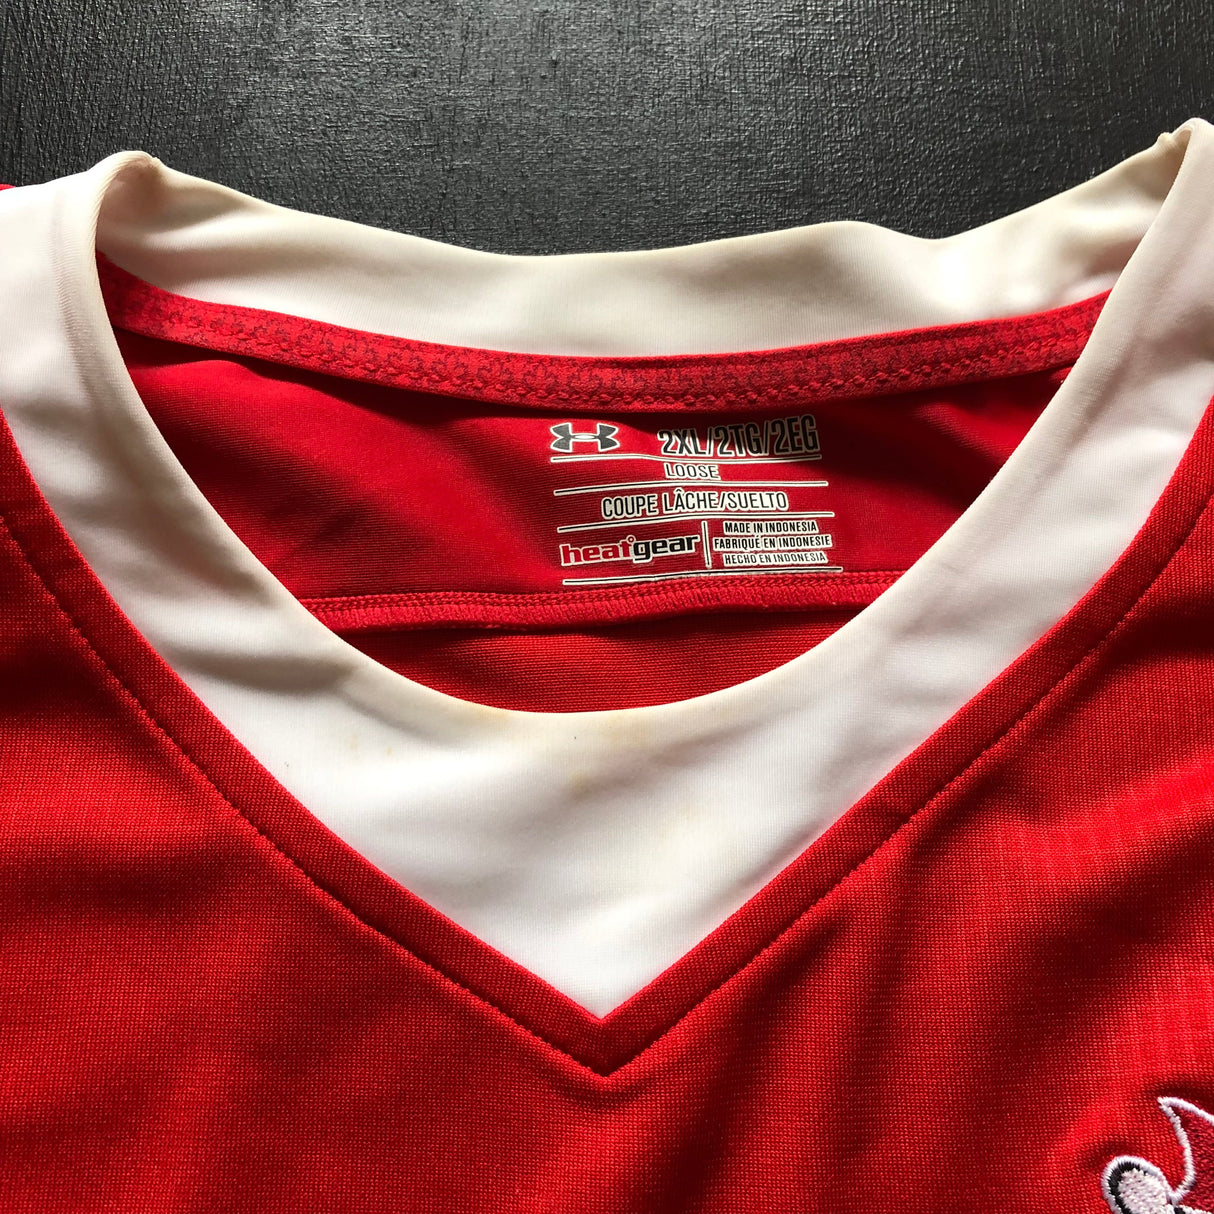 Canada National Rugby Team Jersey 2016 2XL Underdog Rugby - The Tier 2 Rugby Shop 